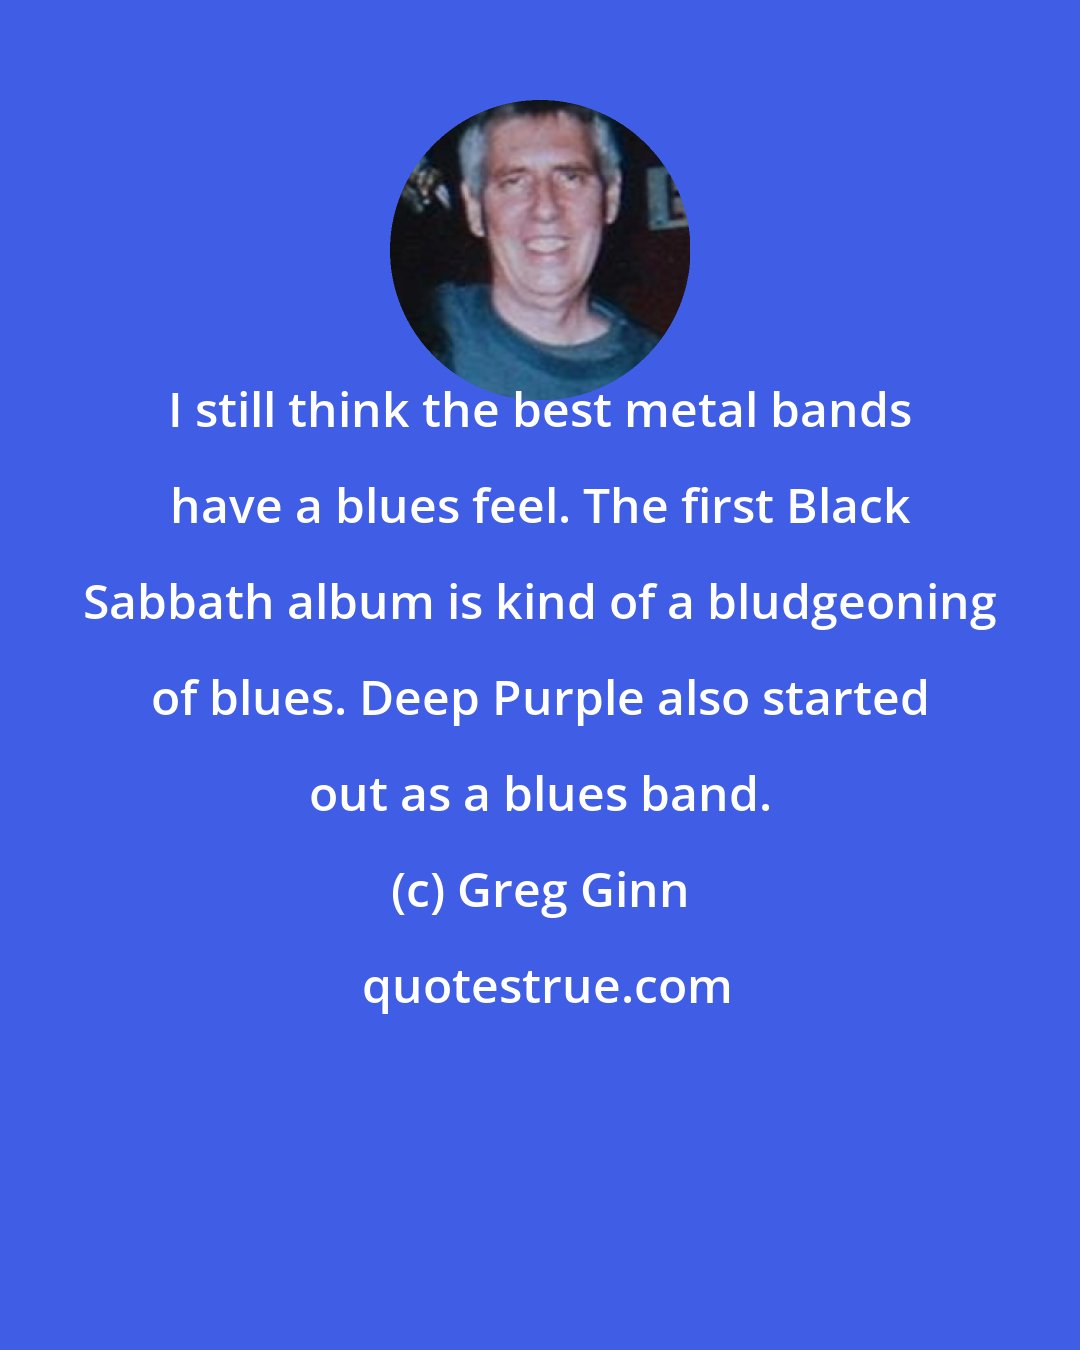 Greg Ginn: I still think the best metal bands have a blues feel. The first Black Sabbath album is kind of a bludgeoning of blues. Deep Purple also started out as a blues band.